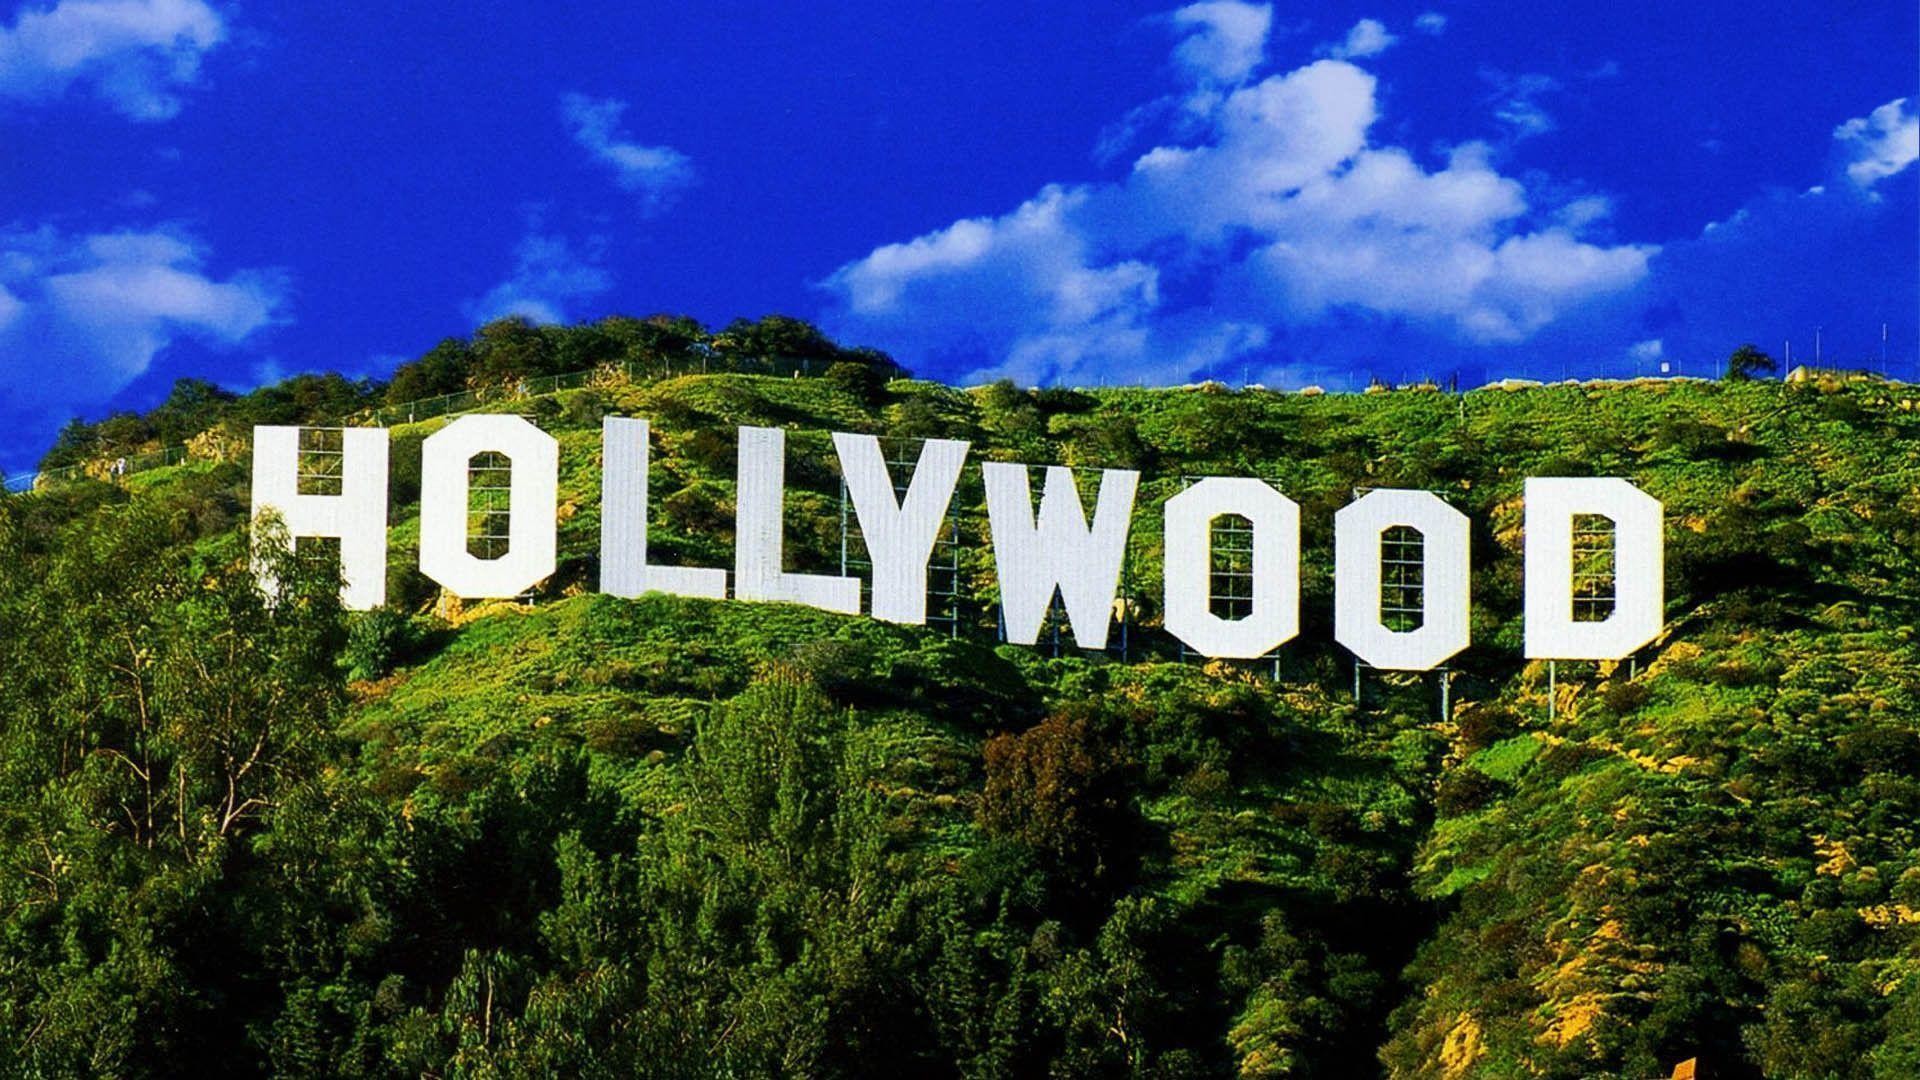 1920x1080 Hollywood Sign Wallpaper Wide or HD | World Wallpapers